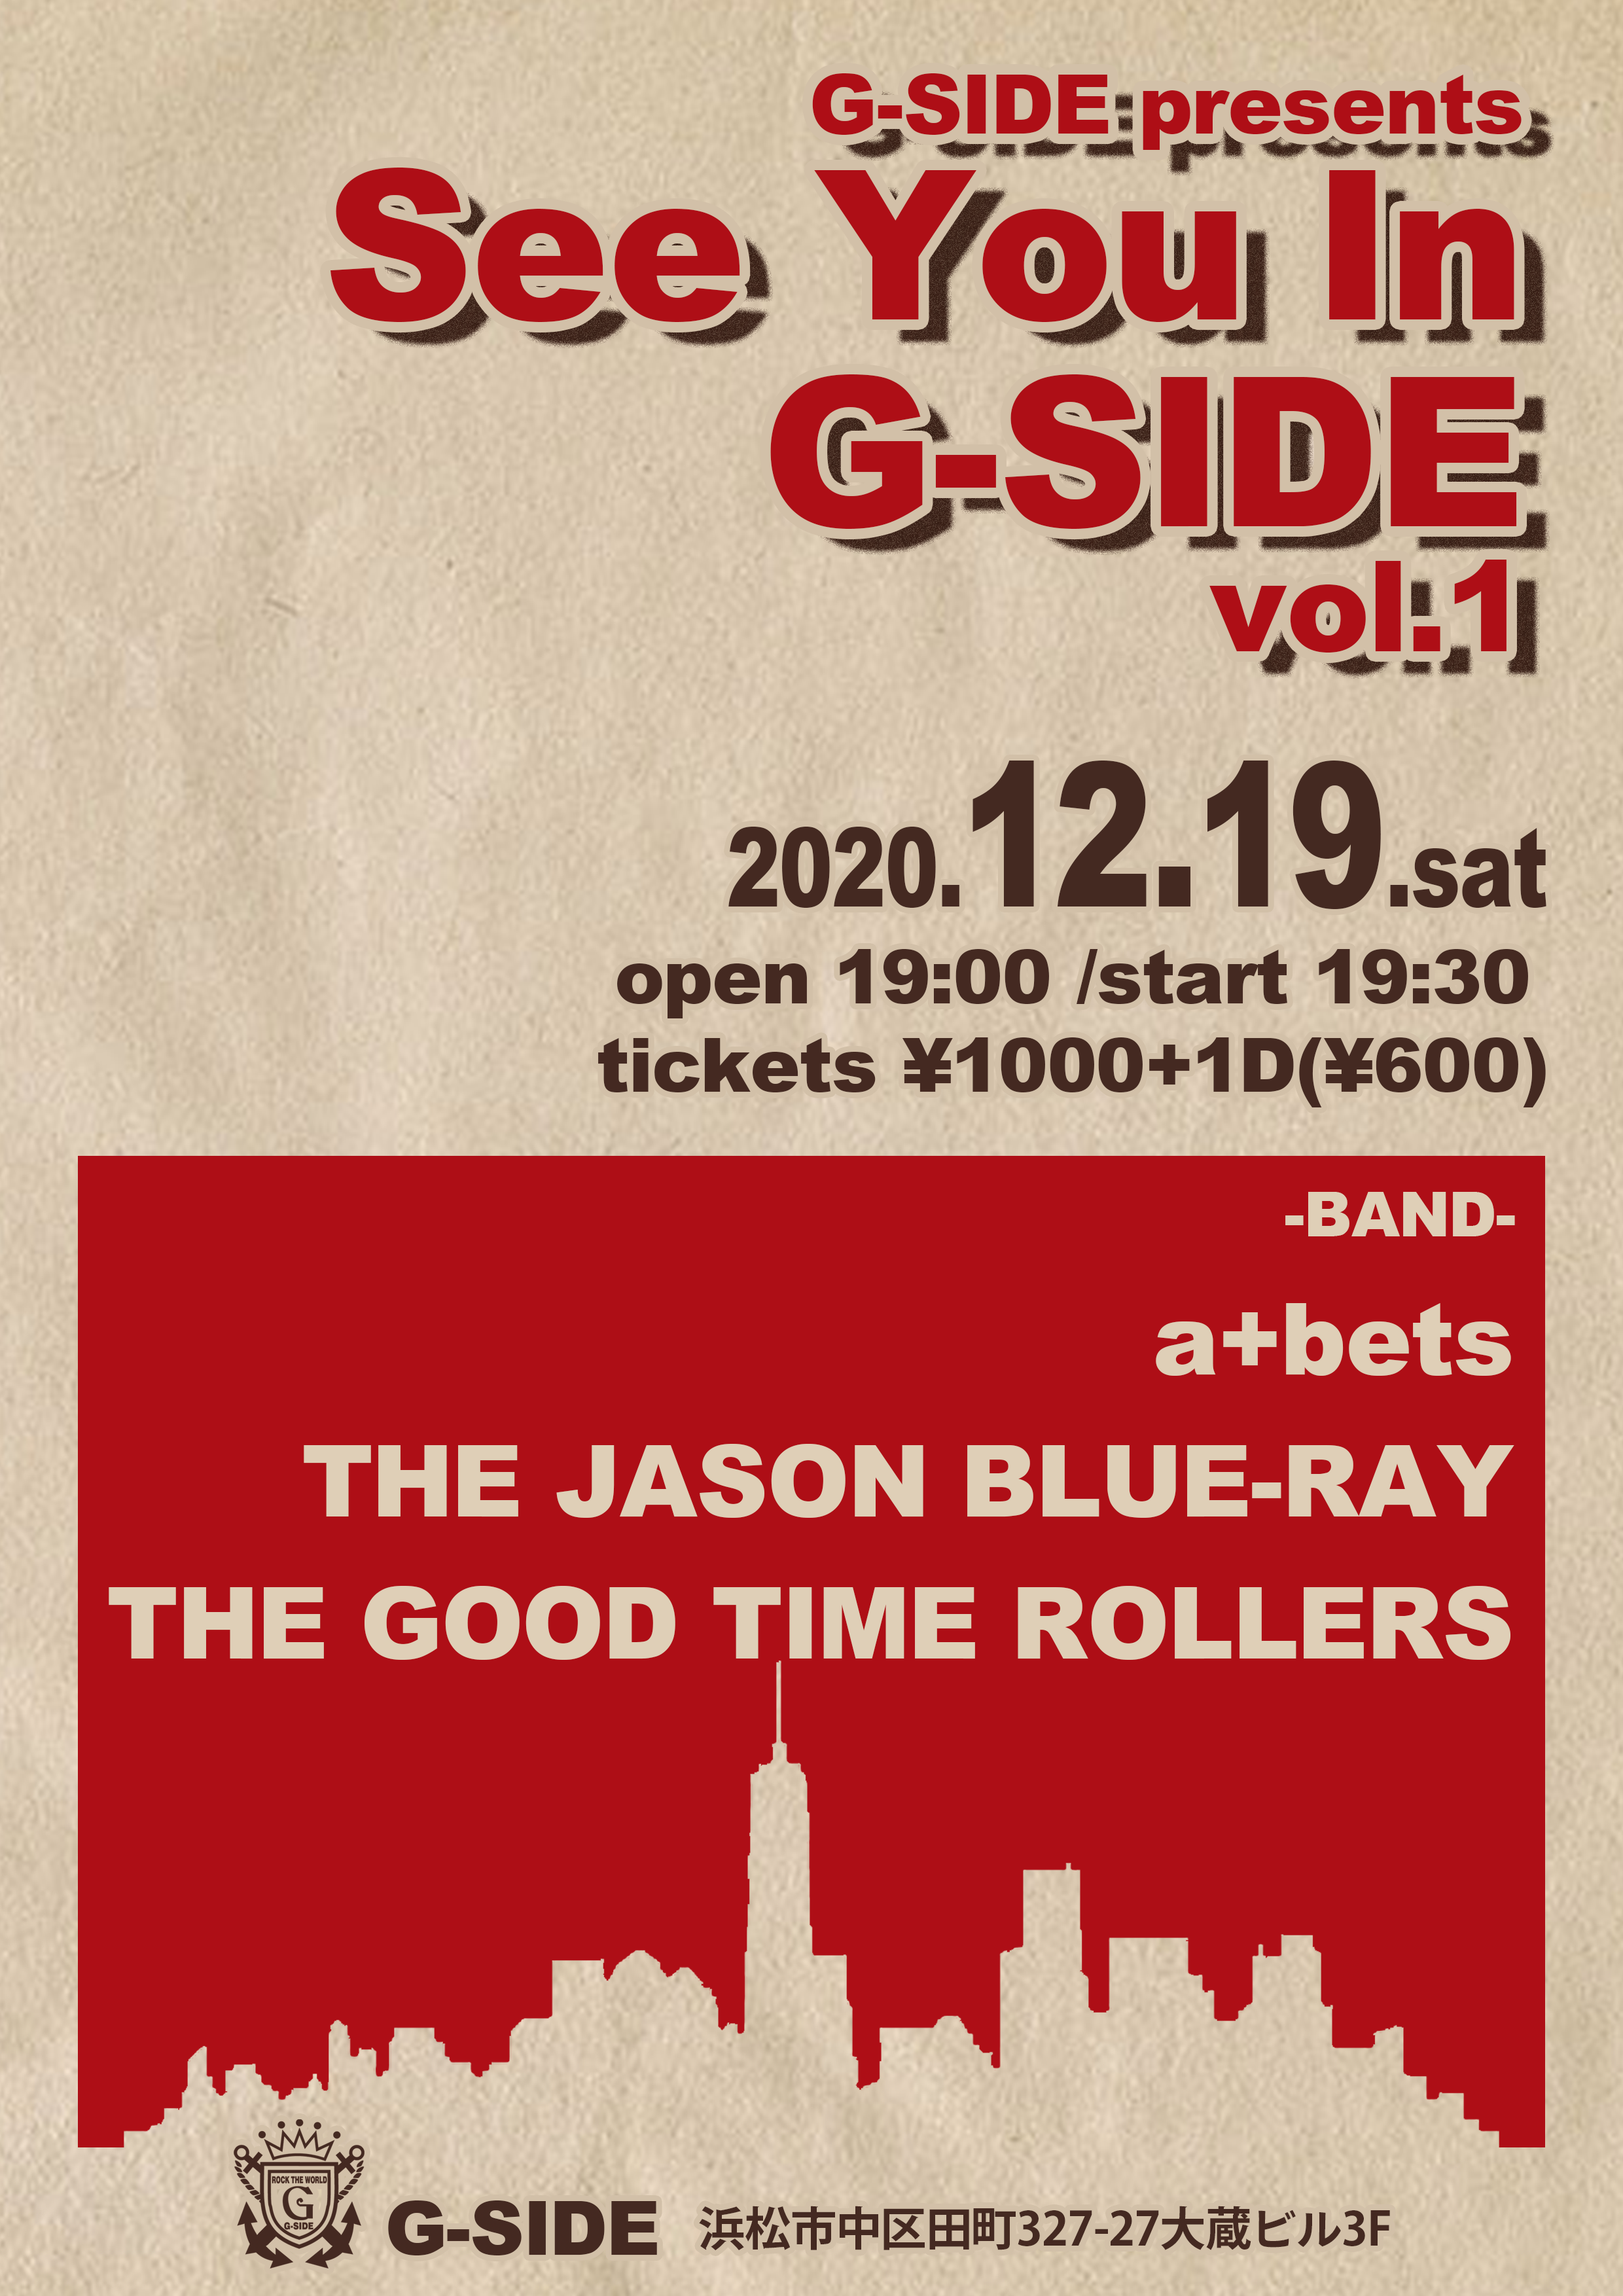 G-SIDE presents See You In G-SIDE vol.1